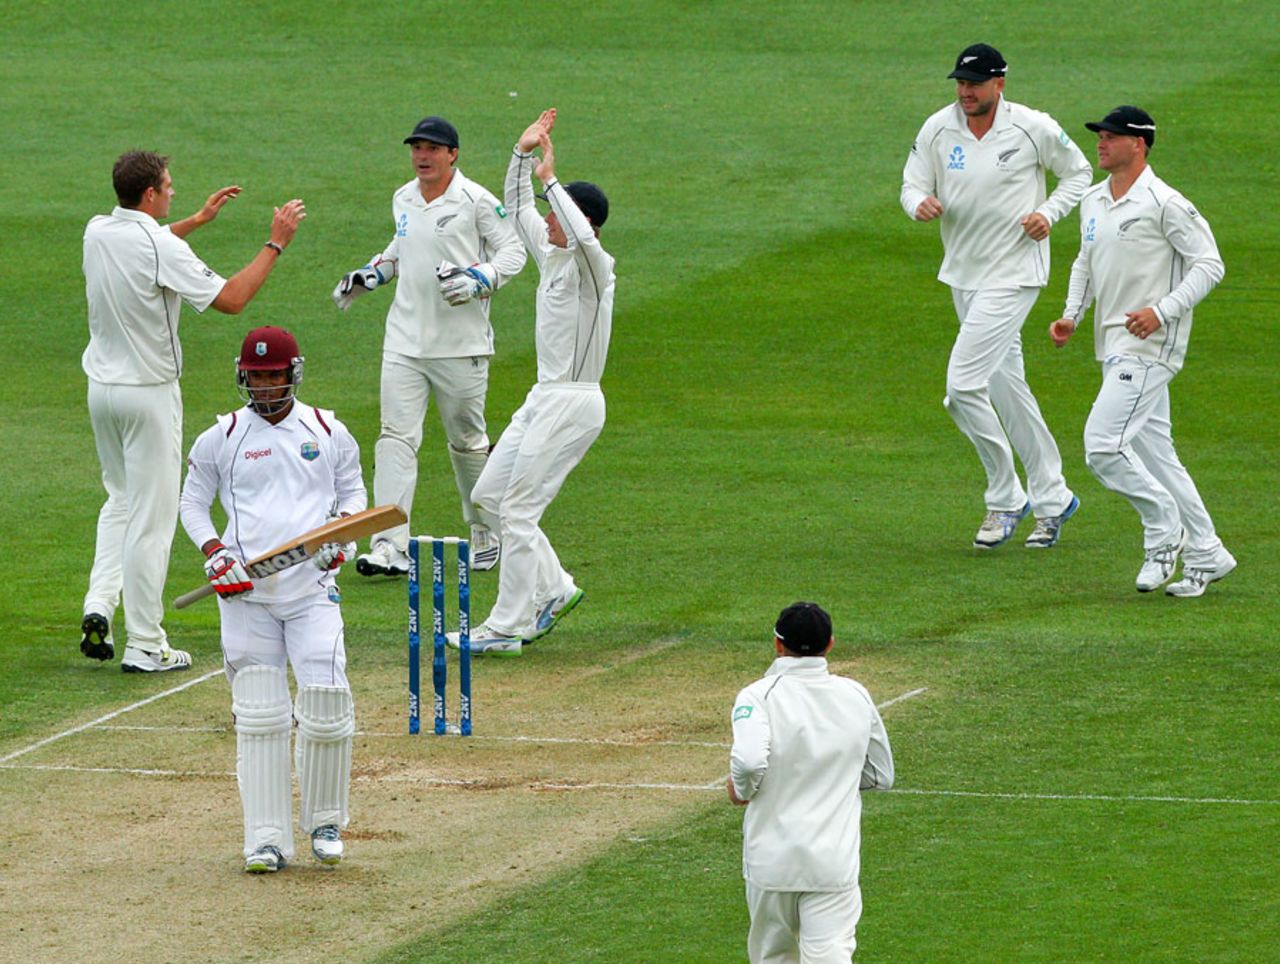 Tim Southee is congratulated by team-mates after dismissing Kieran Powell, New Zealand v West Indies, 2nd Test, Wellington, 2nd day, December 12, 2013